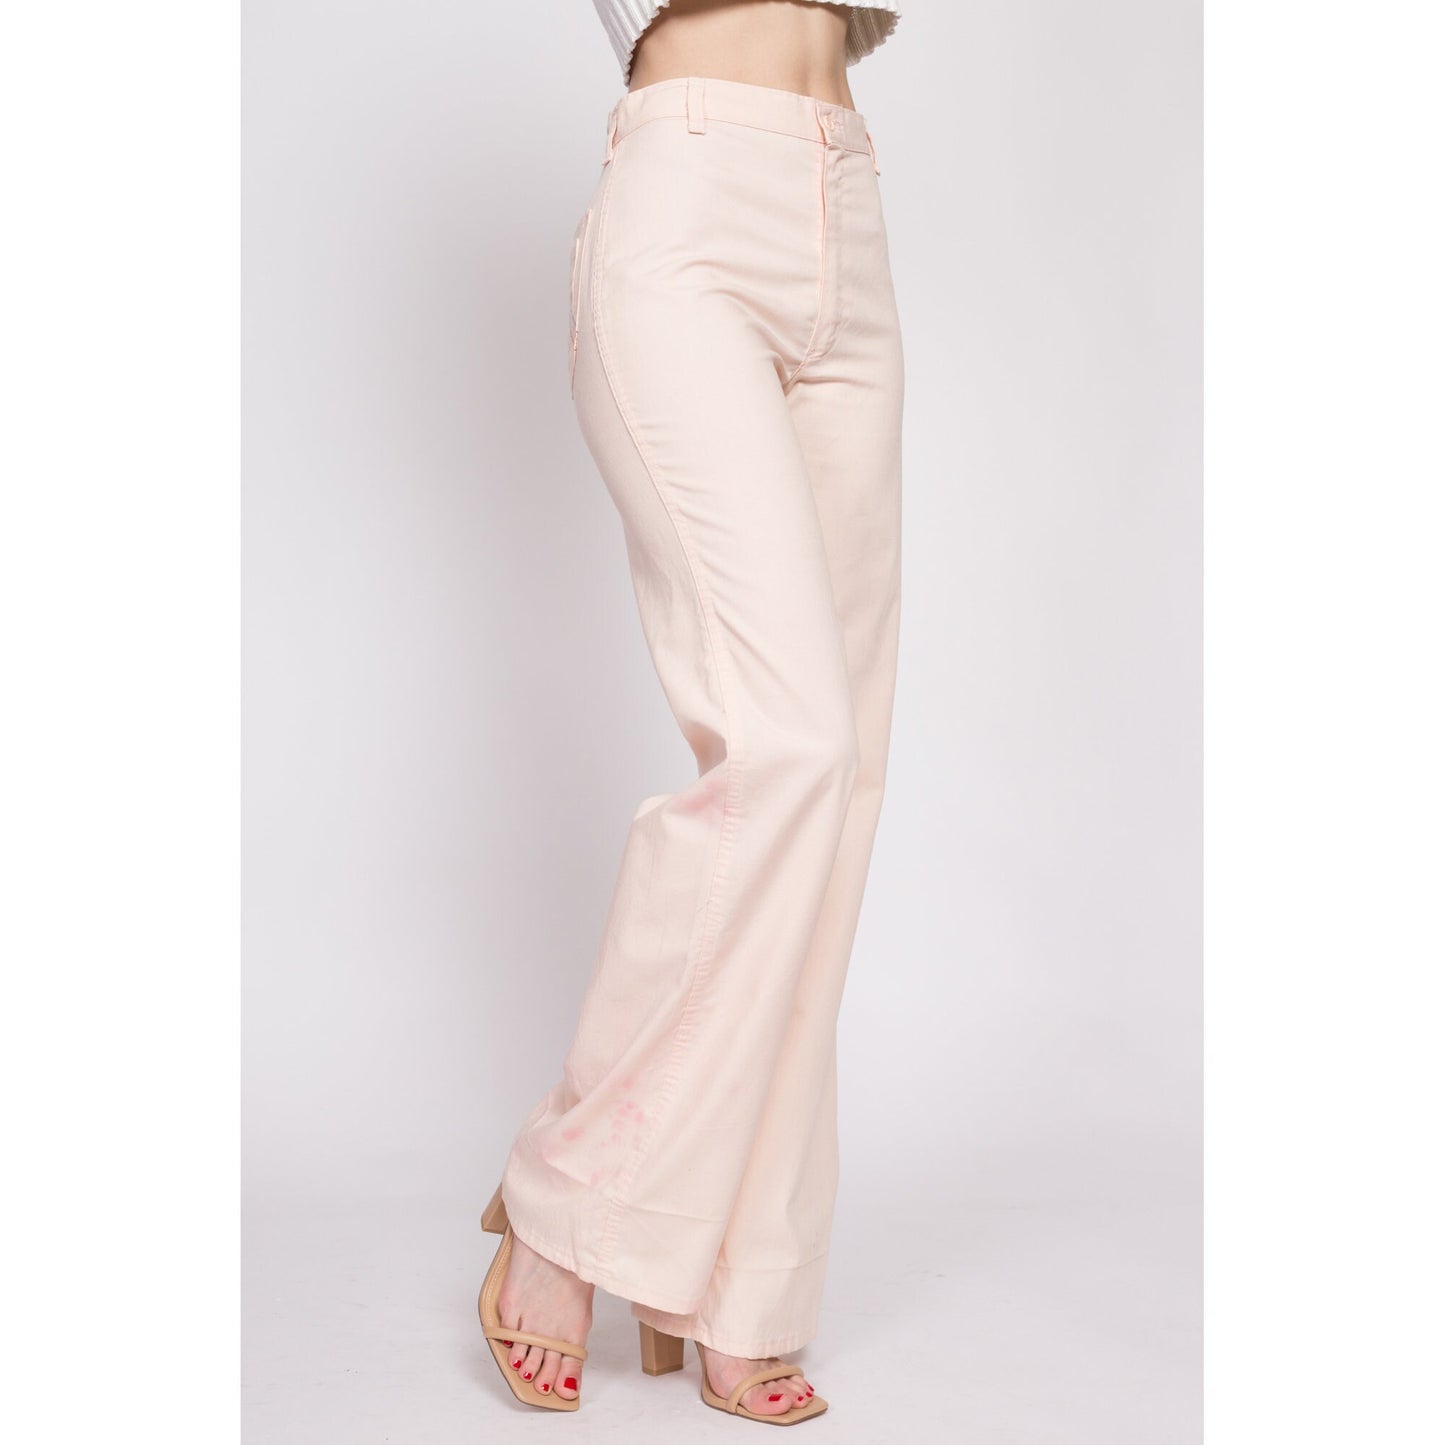 70s Wrangler Rainbow Stitch Flares - Small, 26.5" | Vintage Distressed Baby Pink High Waisted Flared Leg Pants